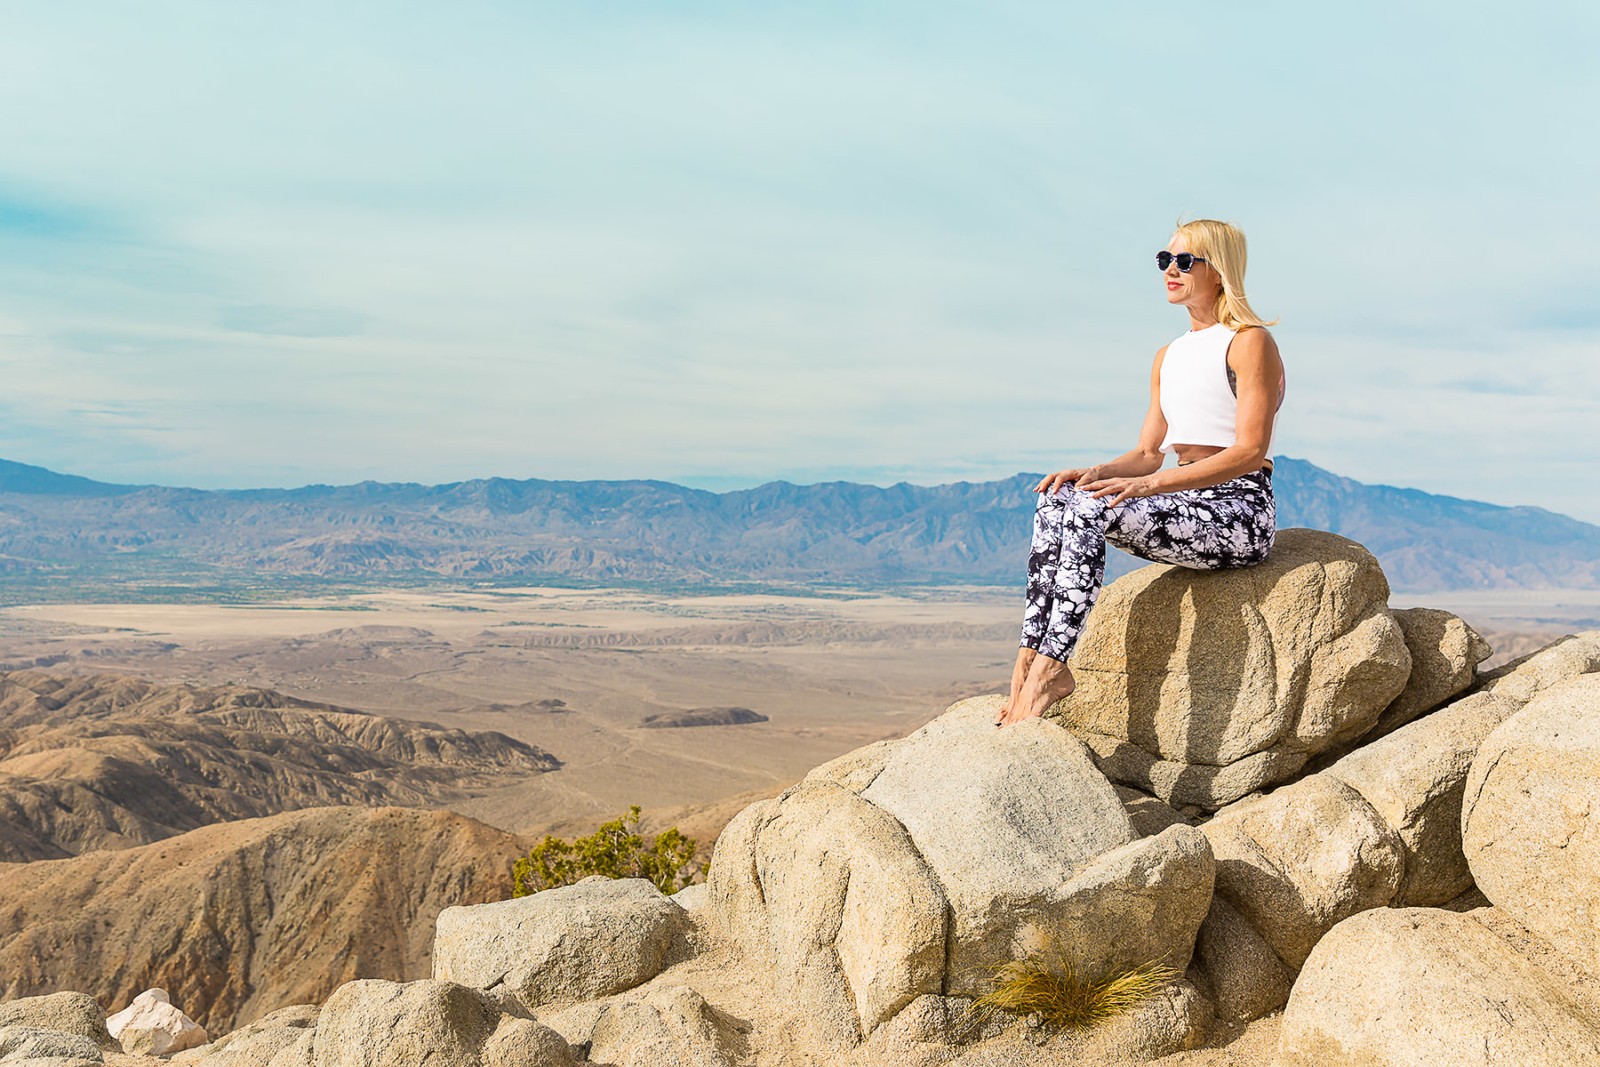 Peaceful view at Keys View in Joshua Tree National Park